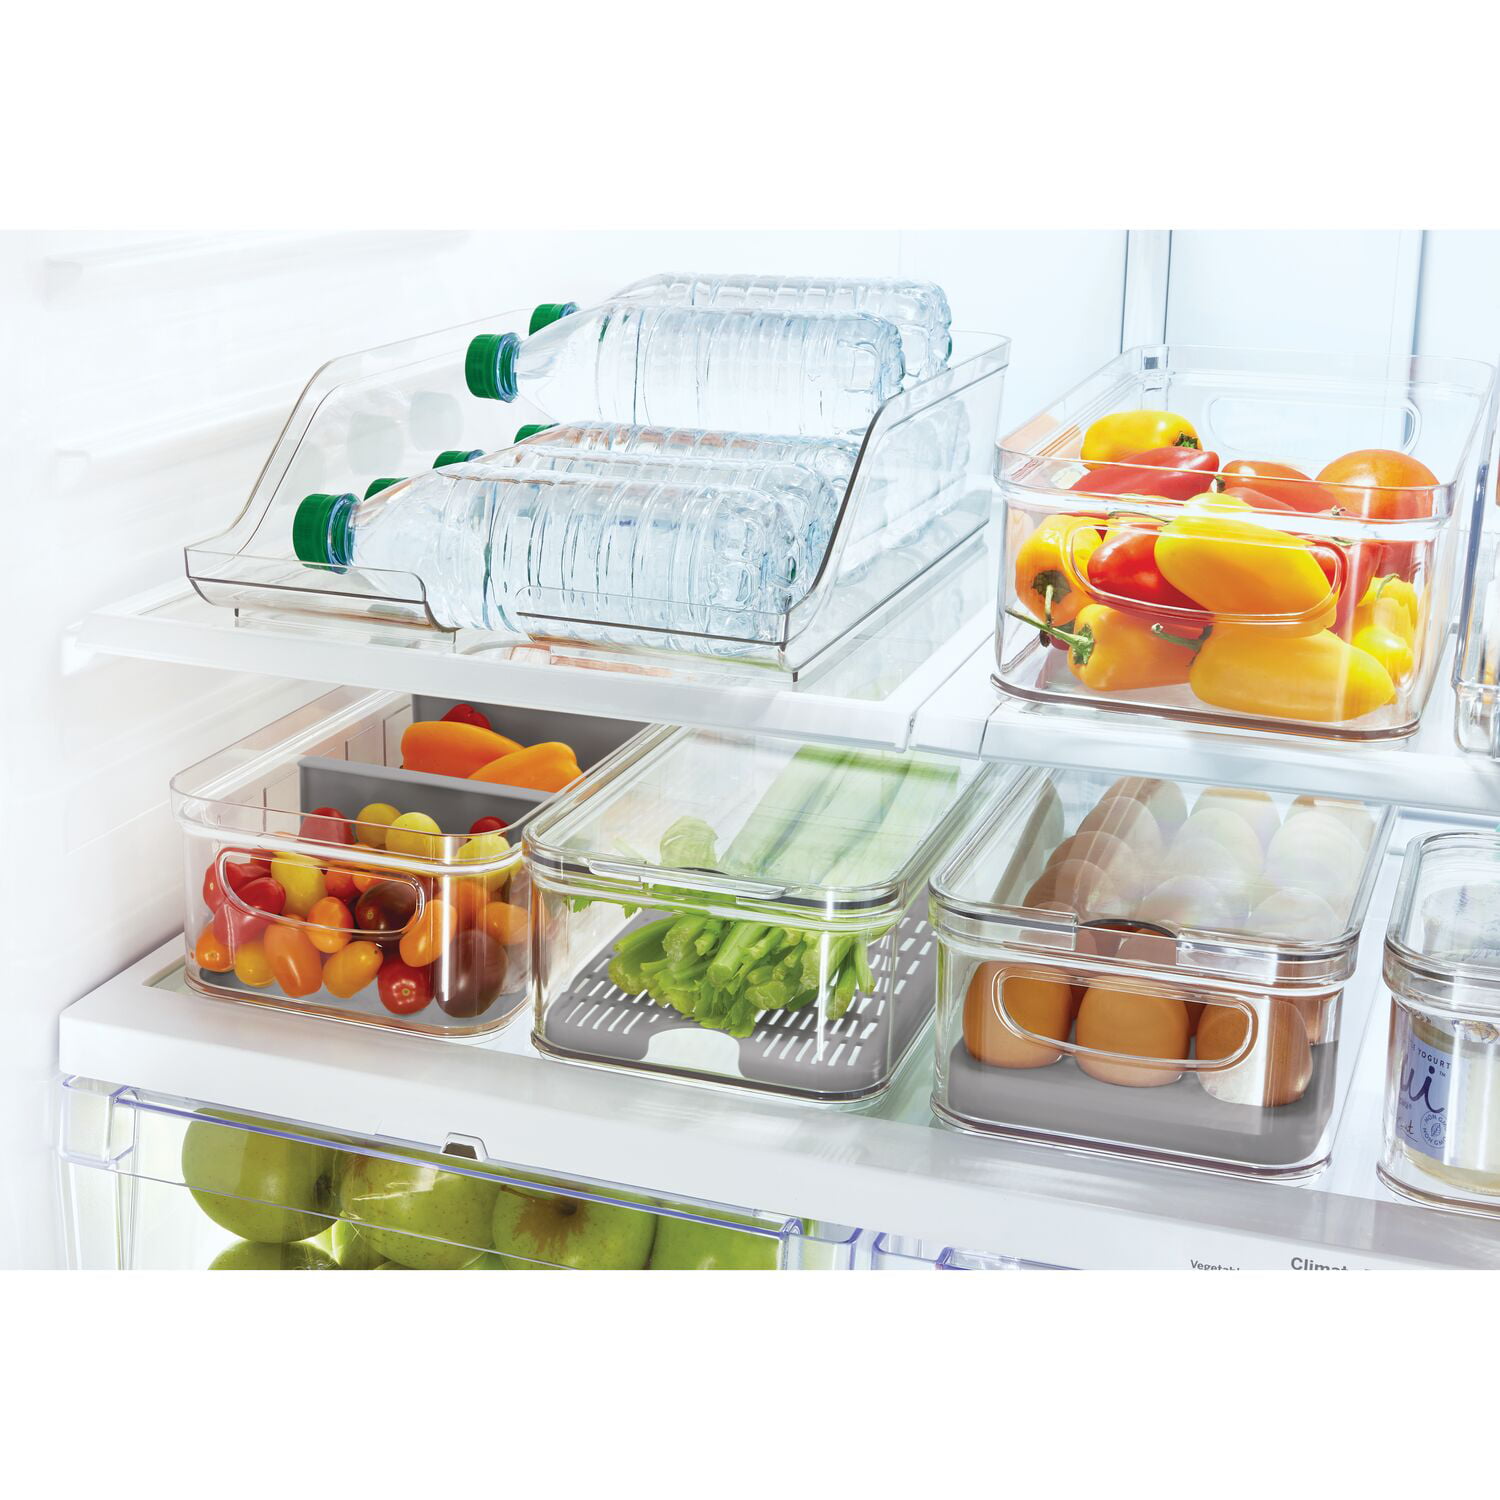  iDesign Plastic Egg Holder for Refrigerator with Handle and  Lid, Fridge Storage Organizer for Kitchen, Holds up to 14, 4.25 x 14.5 x  3, Clear - Egg Separators